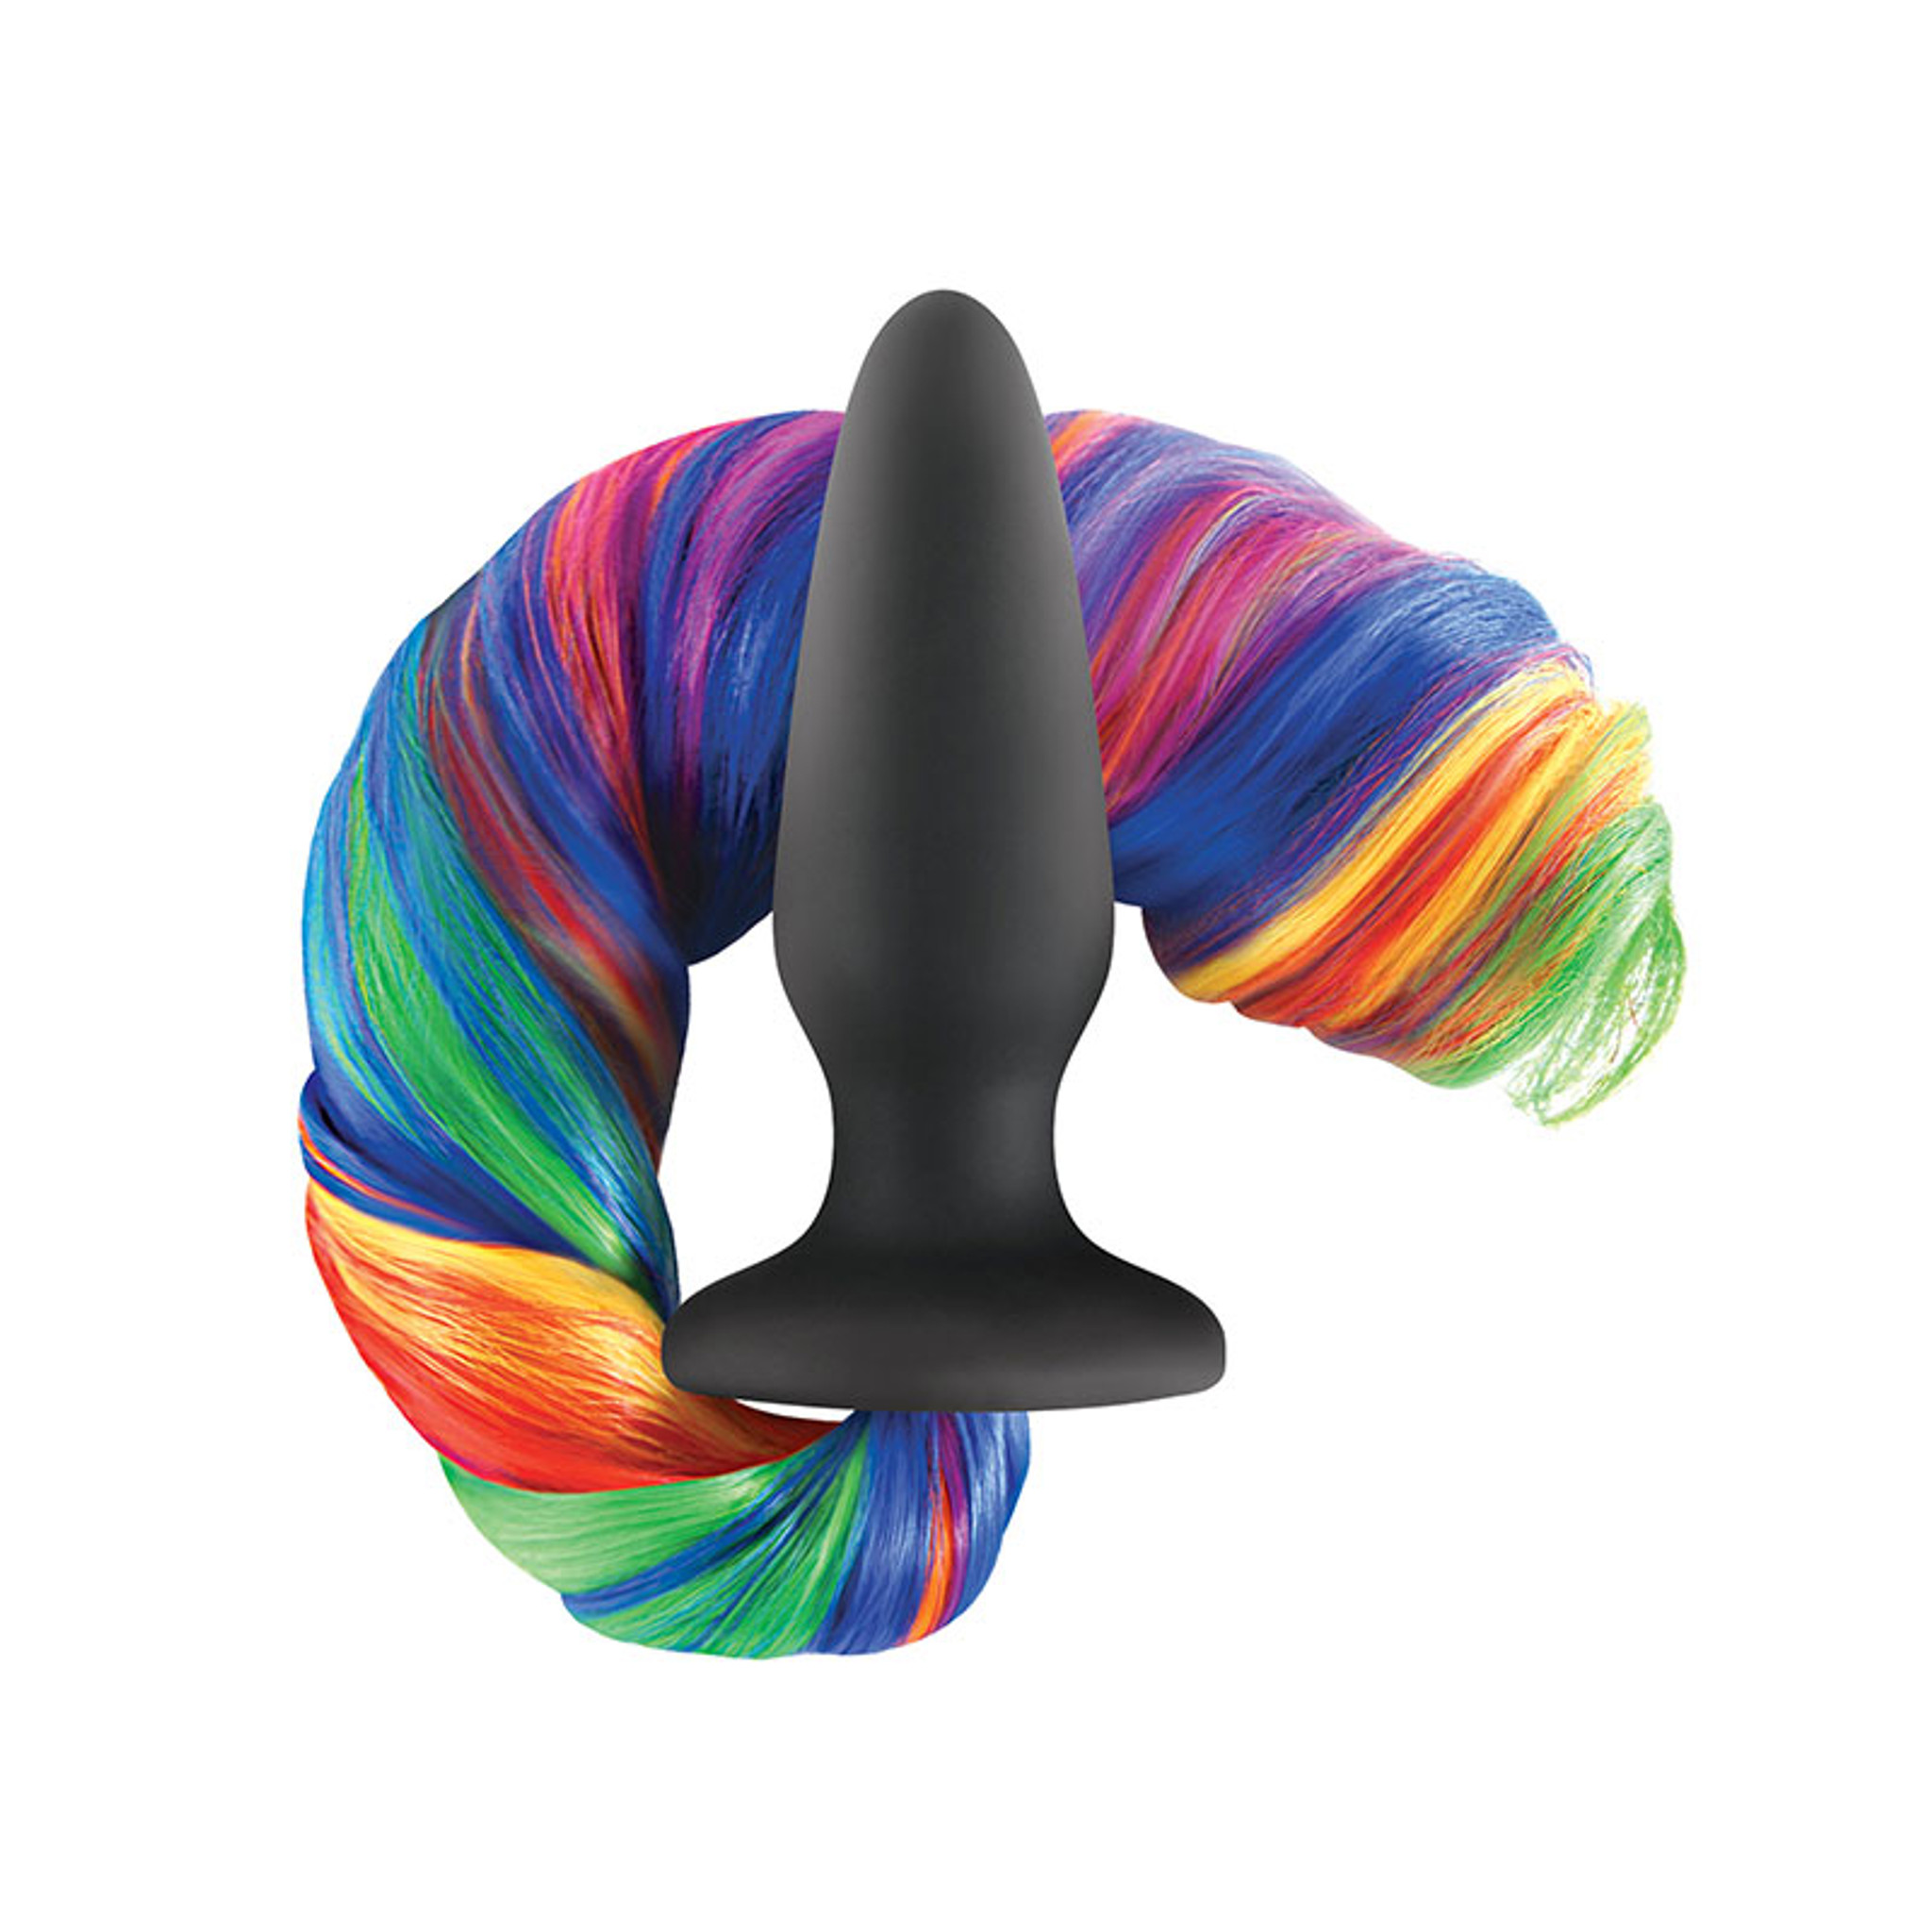 NS Novelties Unicorn Tails Silicone Butt Plug With Tail